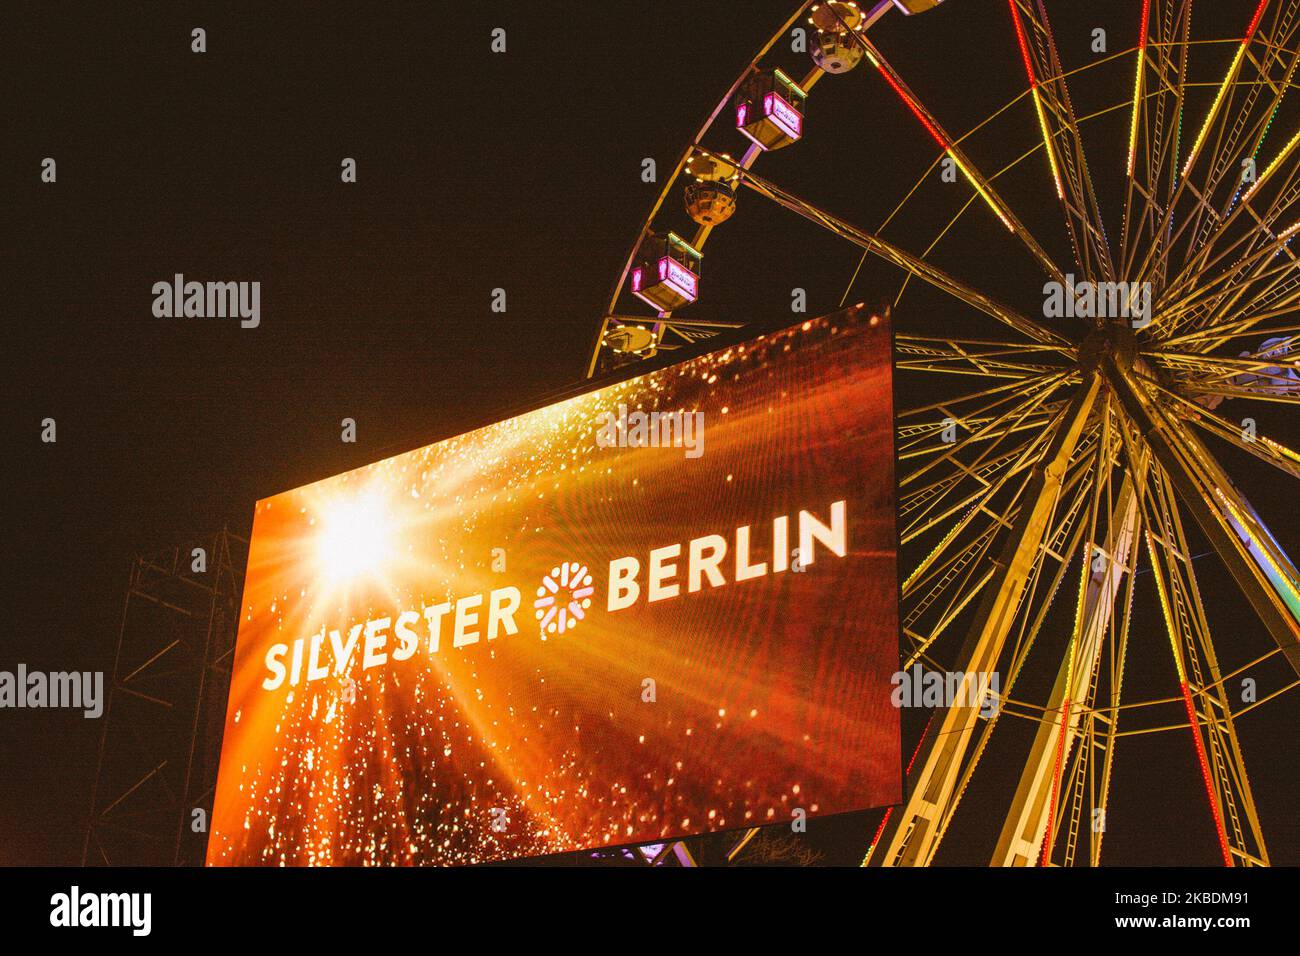 and new Brandenburg eve berlin Alamy - Page photography stock - years gate 2 images hi-res